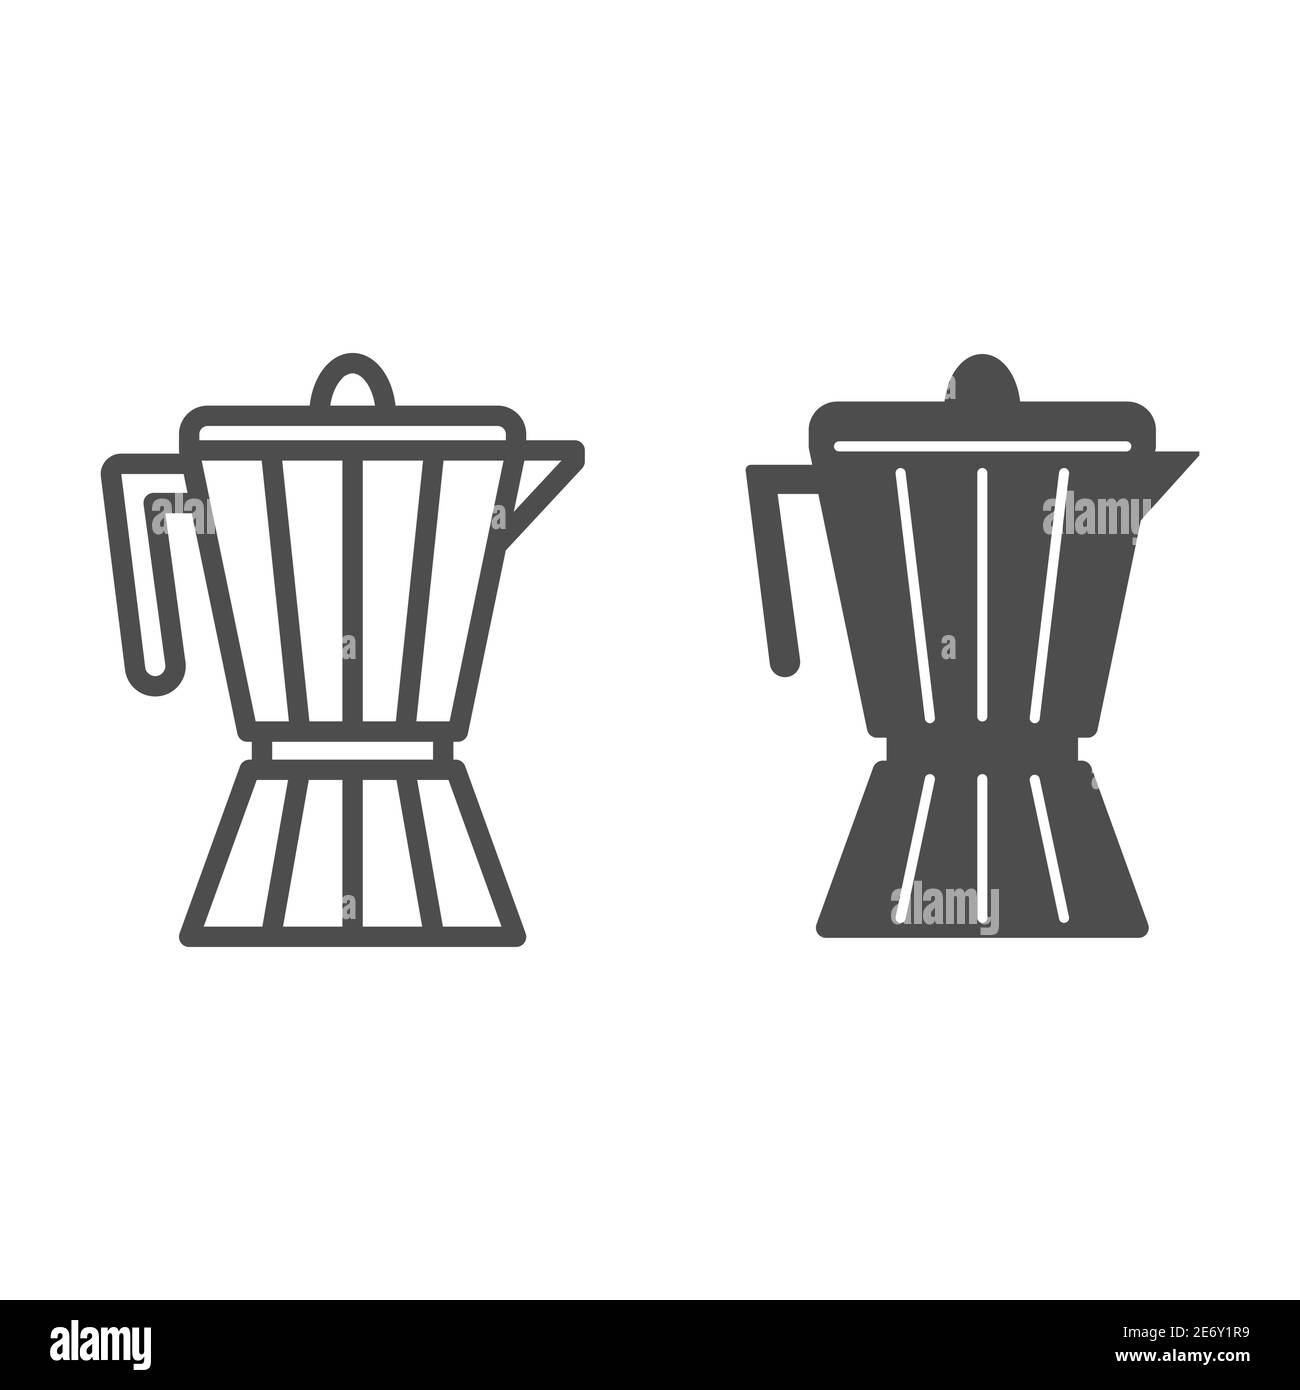 Coffee maker line and solid icon, Kitchen appliances concept, Coffee pot sign on white background, Geyser coffee maker icon in outline style for Stock Vector